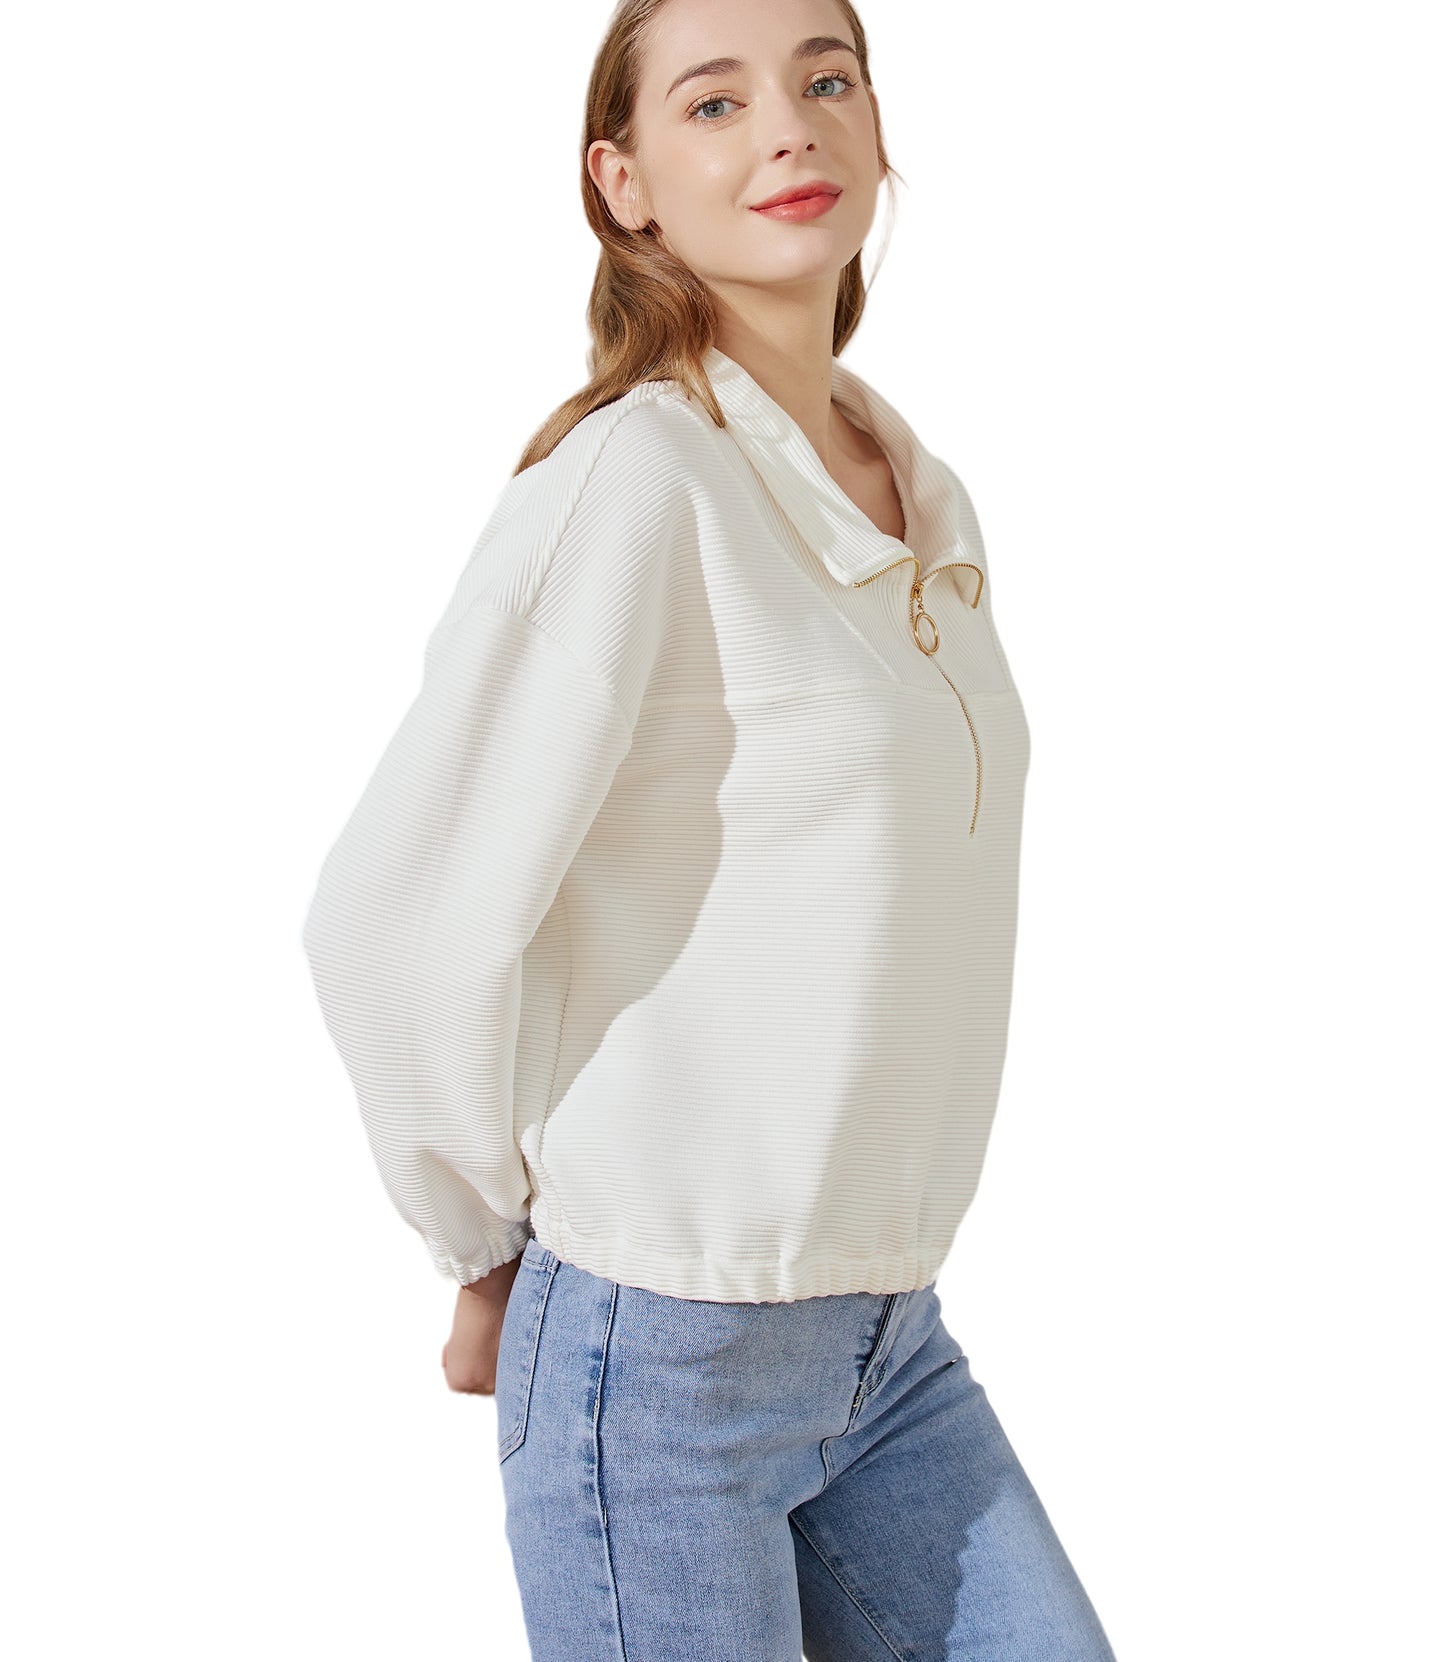 NEEINGO Women's Half Zip Pull Over Cropped Long Sleeve Off Shoulder Sweater Shirt With Elastic on Cuff and Hem